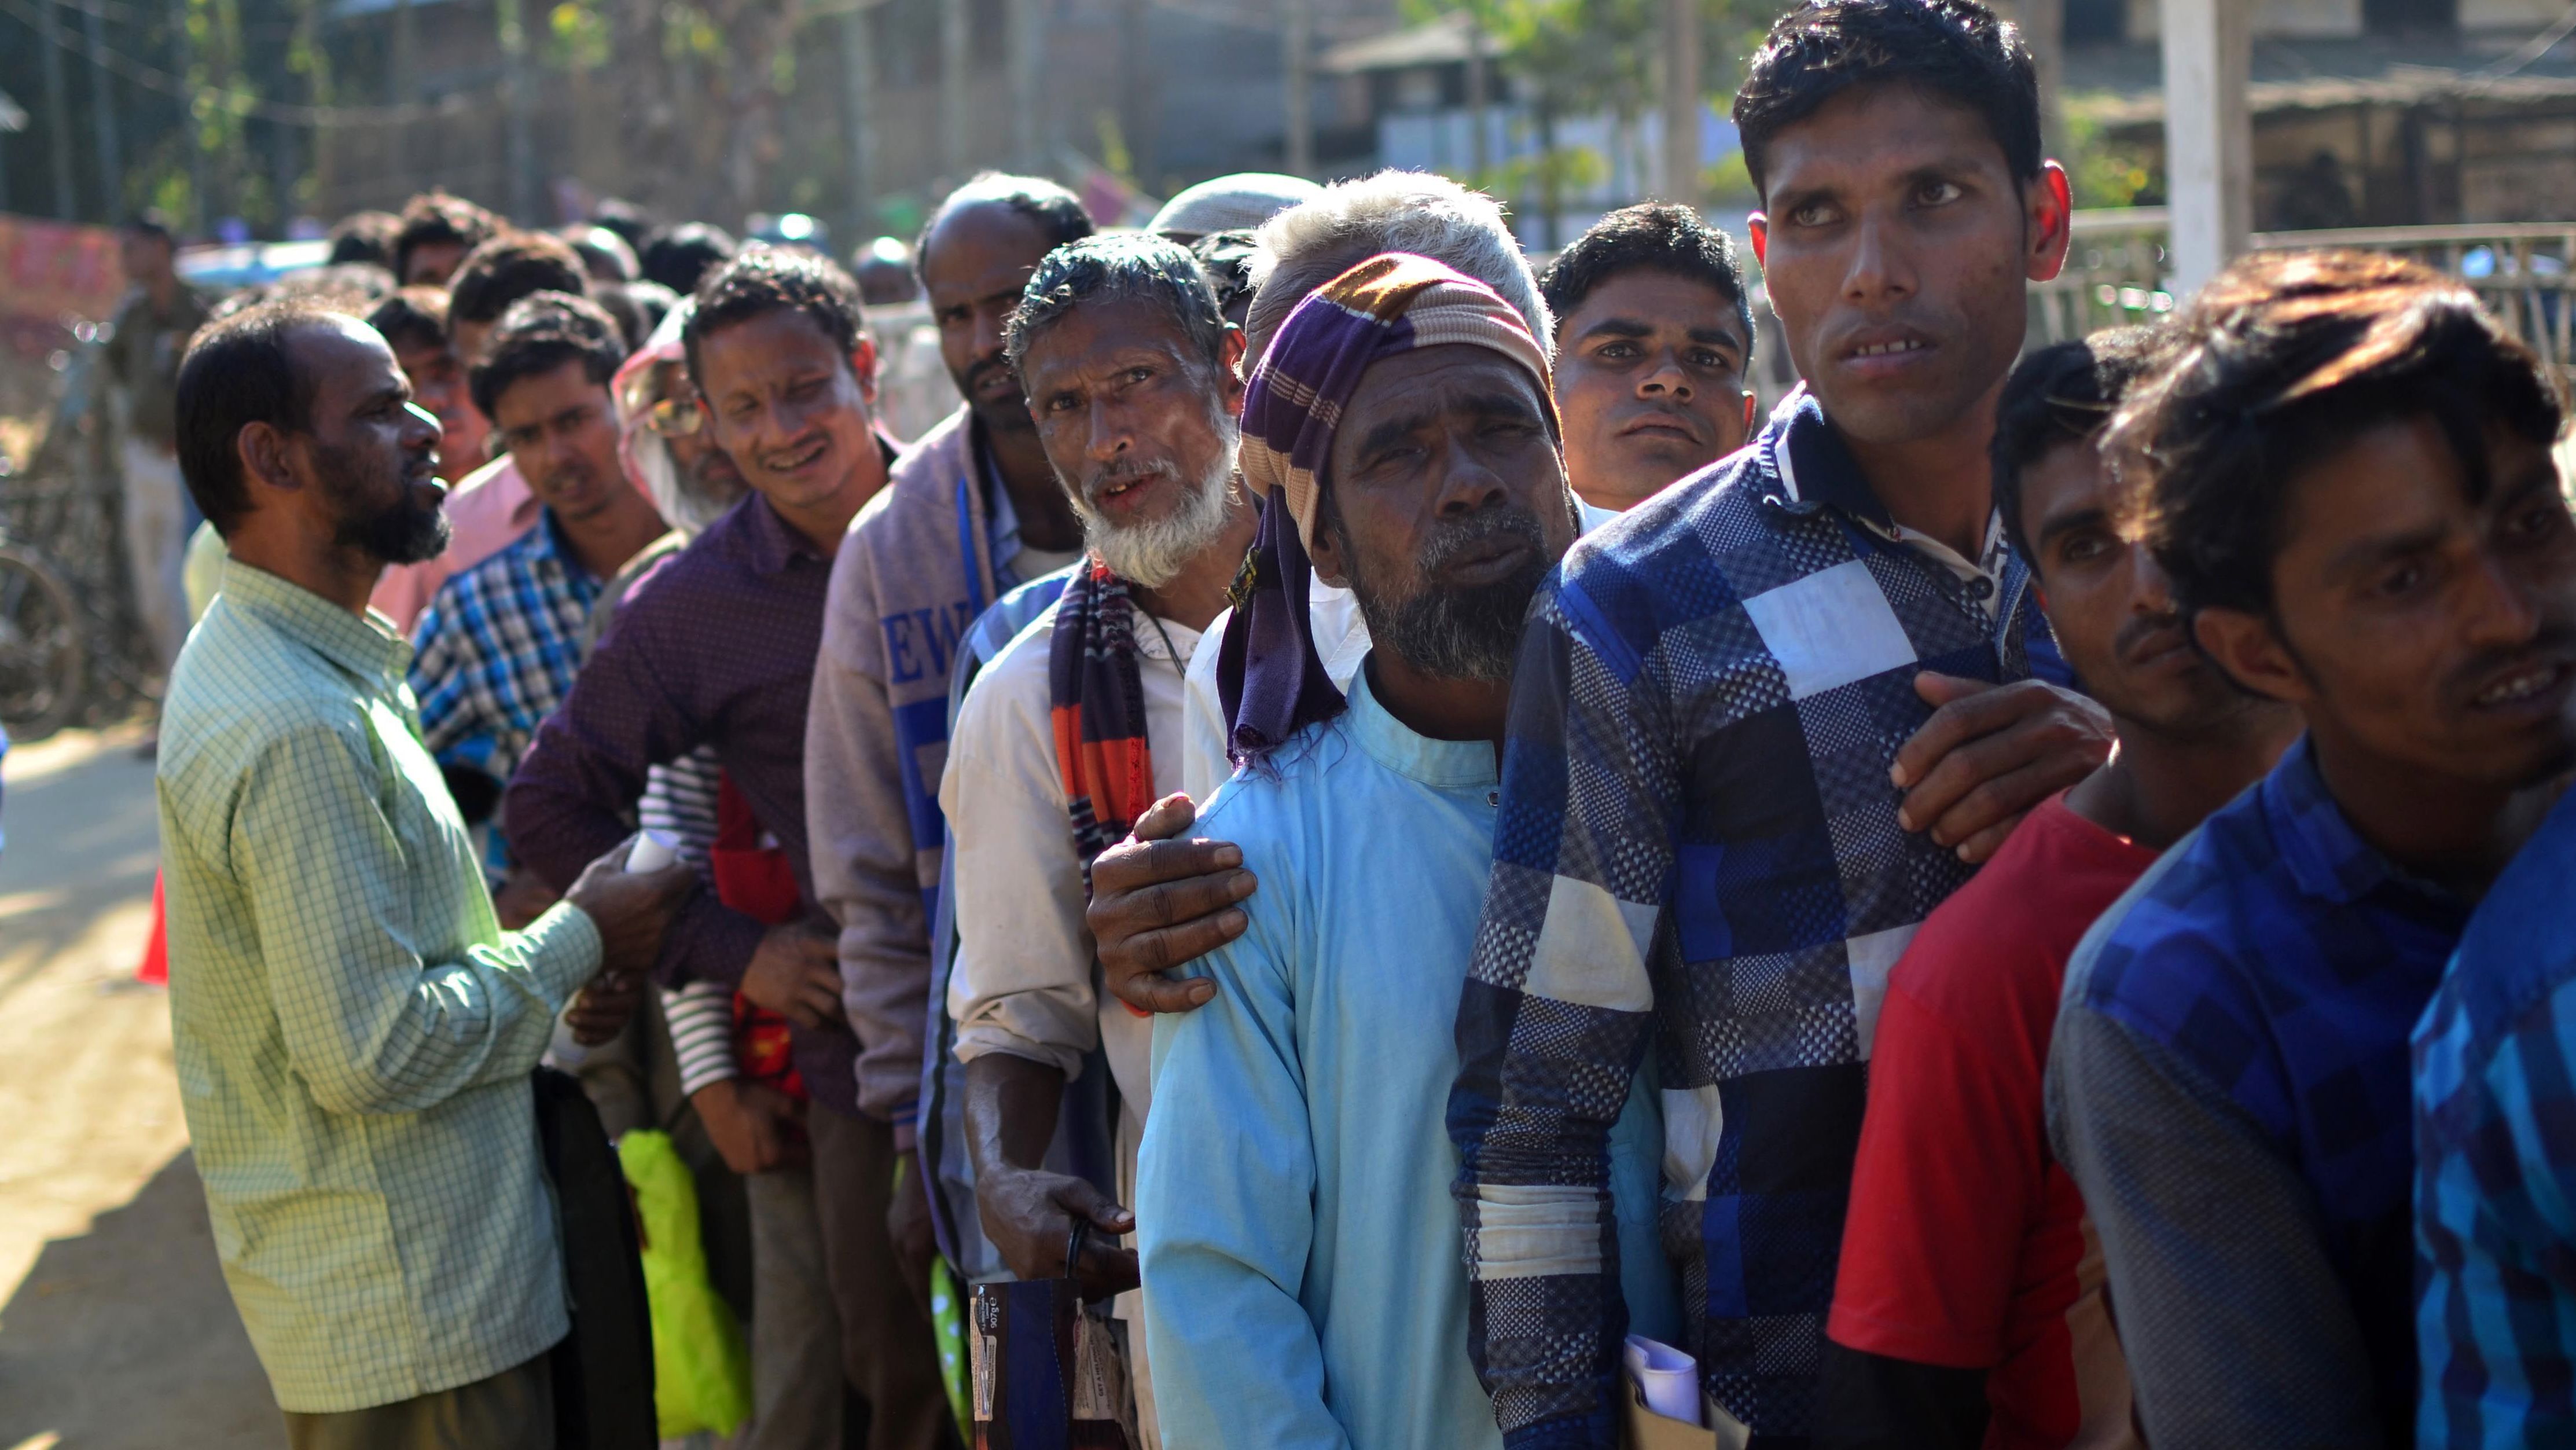 Assam is the only state in India to have a citizenship register. Villagers in Assam stand in line to check their names on the first draft of NRC earlier this year. 